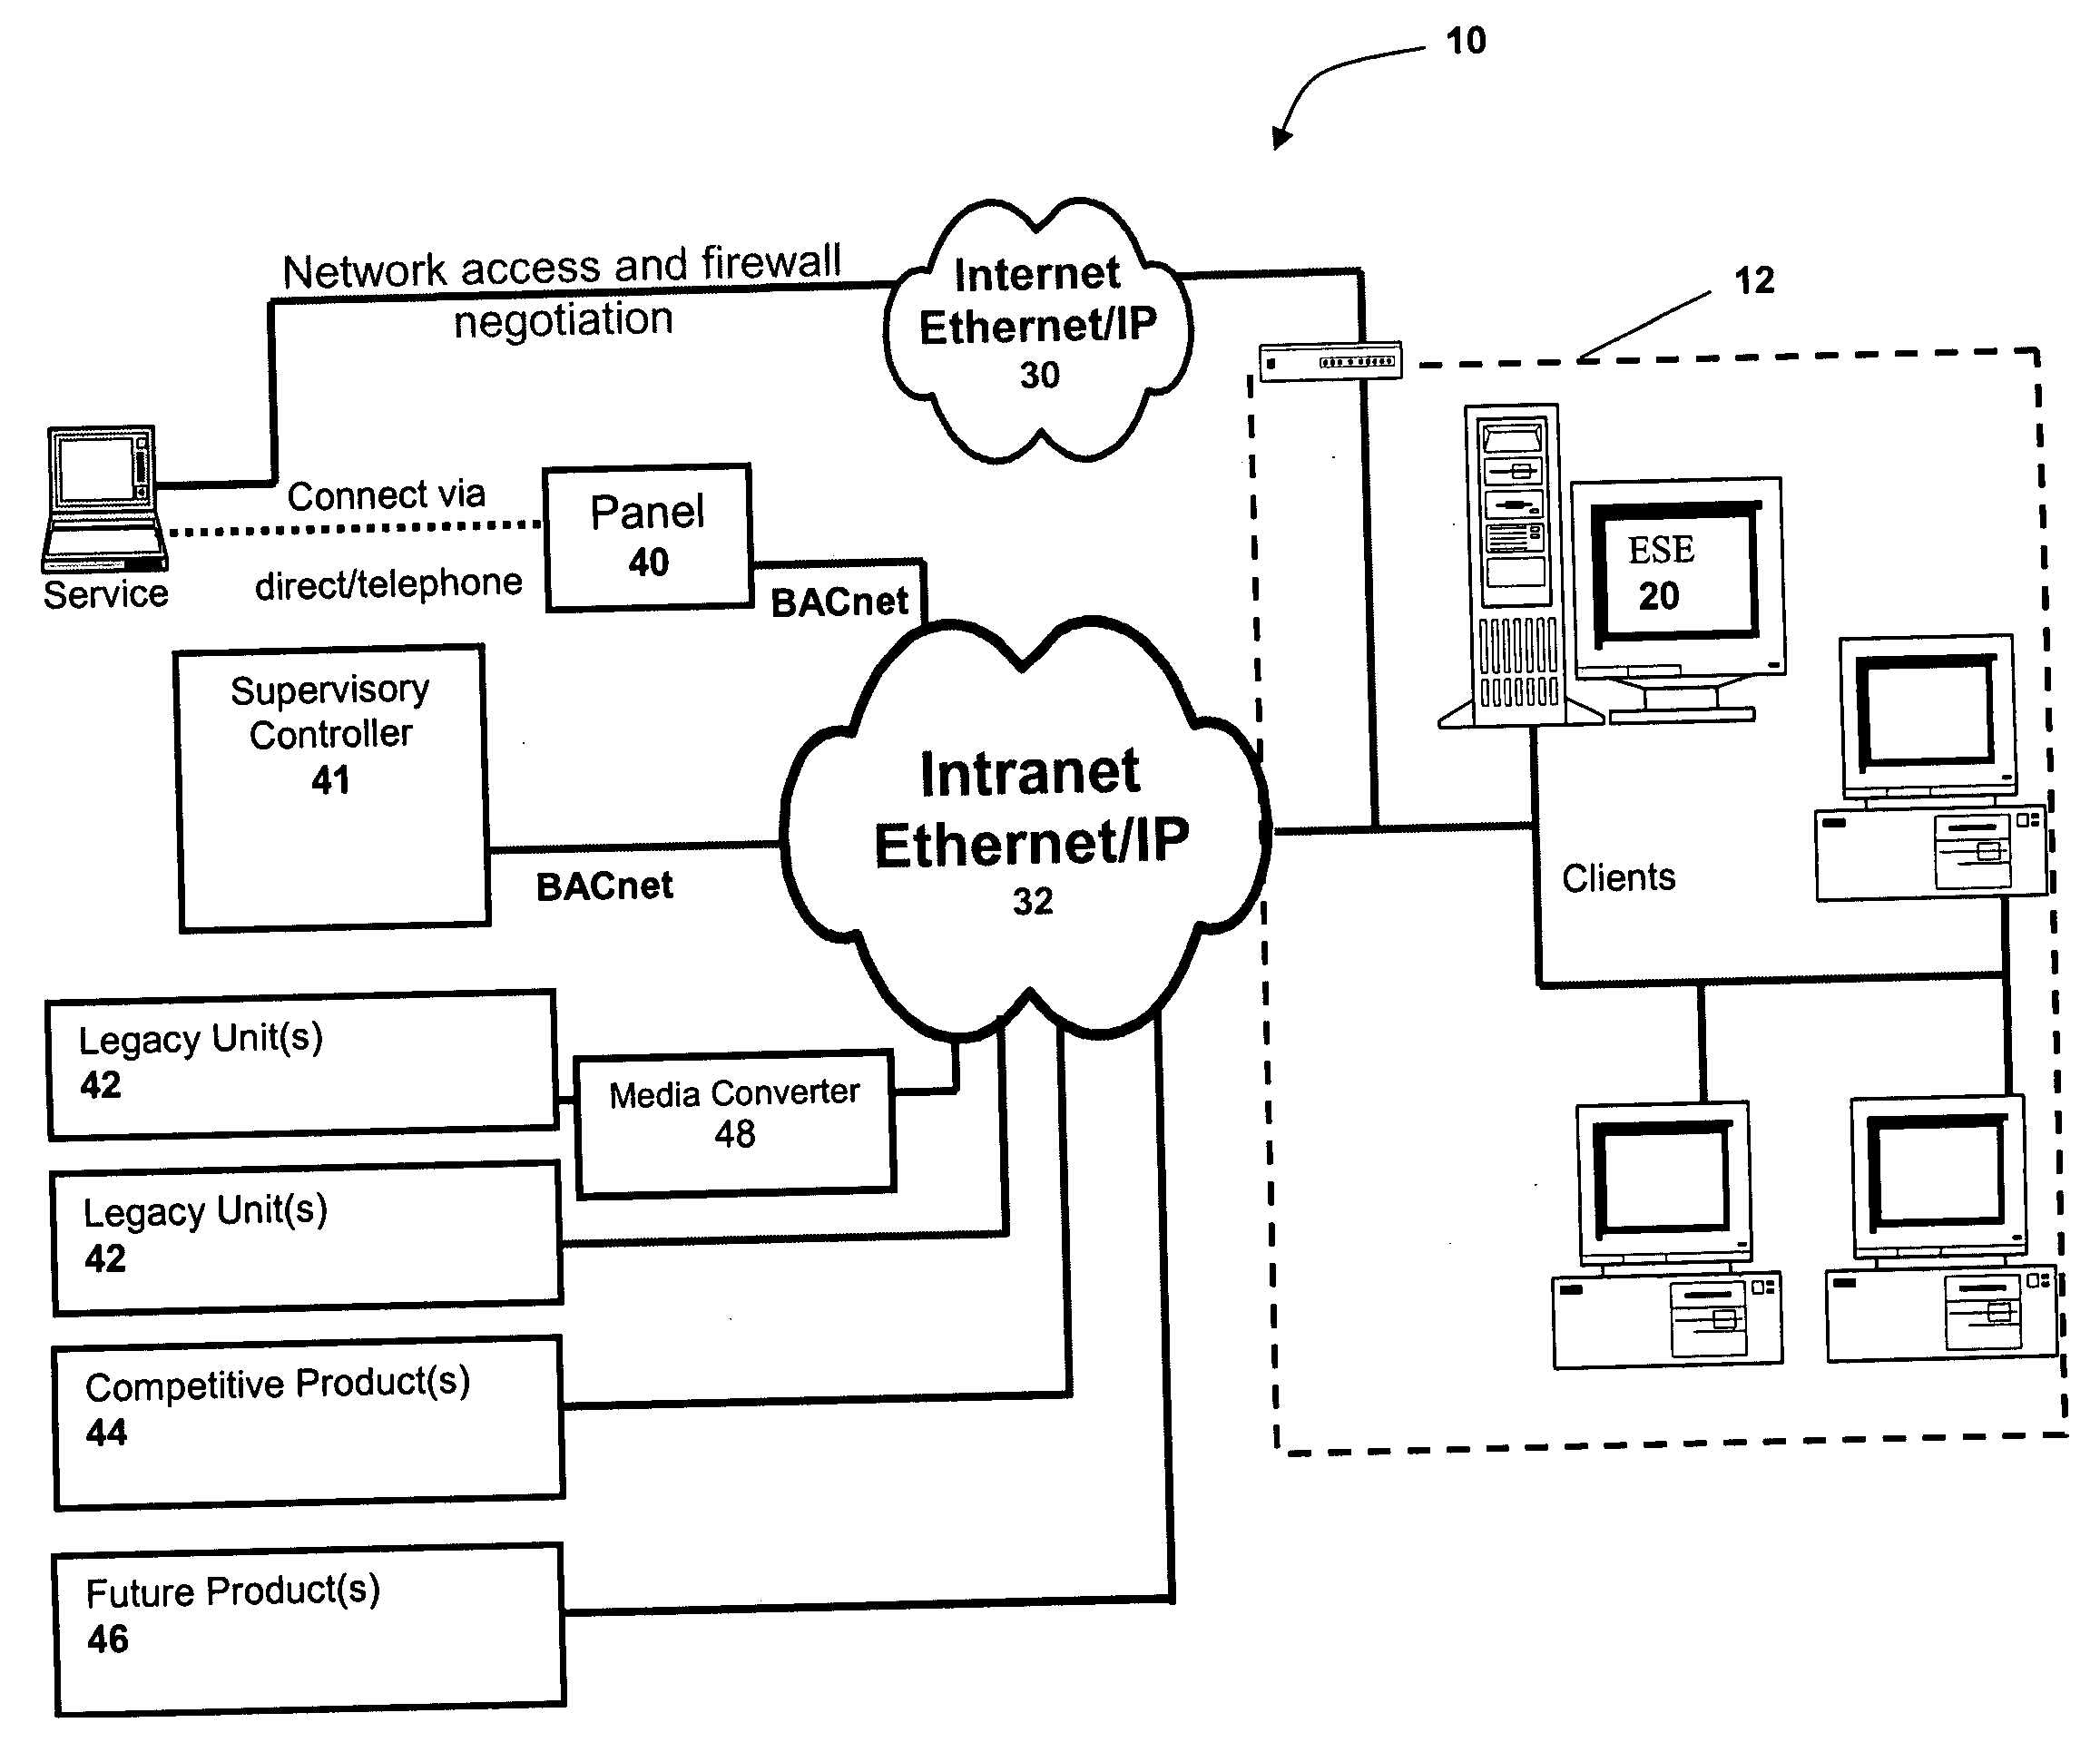 Dynamically extensible and automatically configurable building automation system and architecture